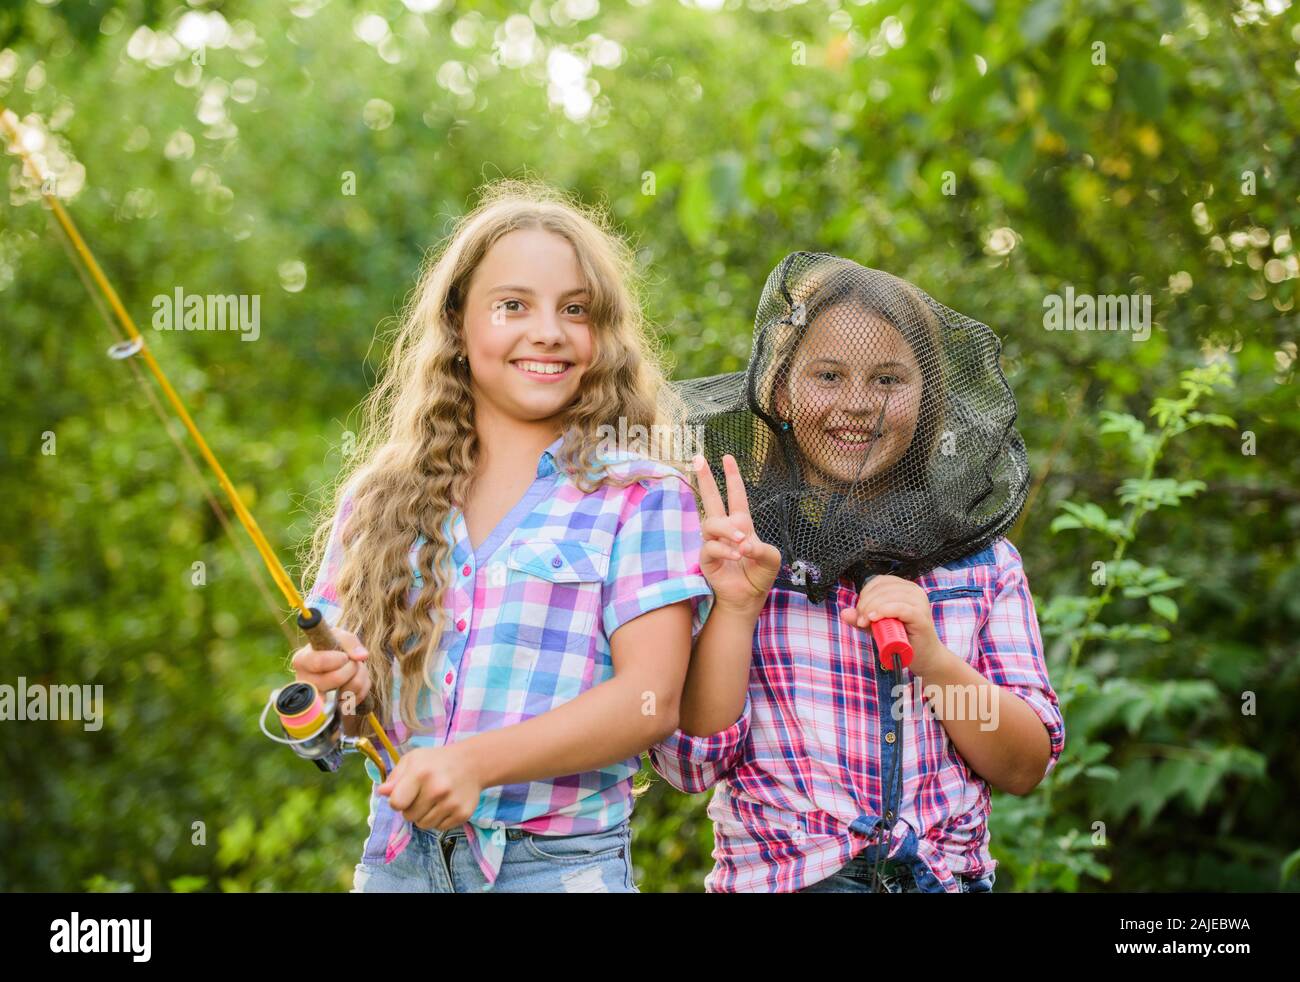 https://c8.alamy.com/comp/2AJEBWA/having-fun-fly-fishing-kids-spend-time-together-fishing-fishing-skills-adorable-girls-nature-background-teamwork-summer-hobby-happy-smiling-children-with-net-and-rod-happy-childhood-2AJEBWA.jpg